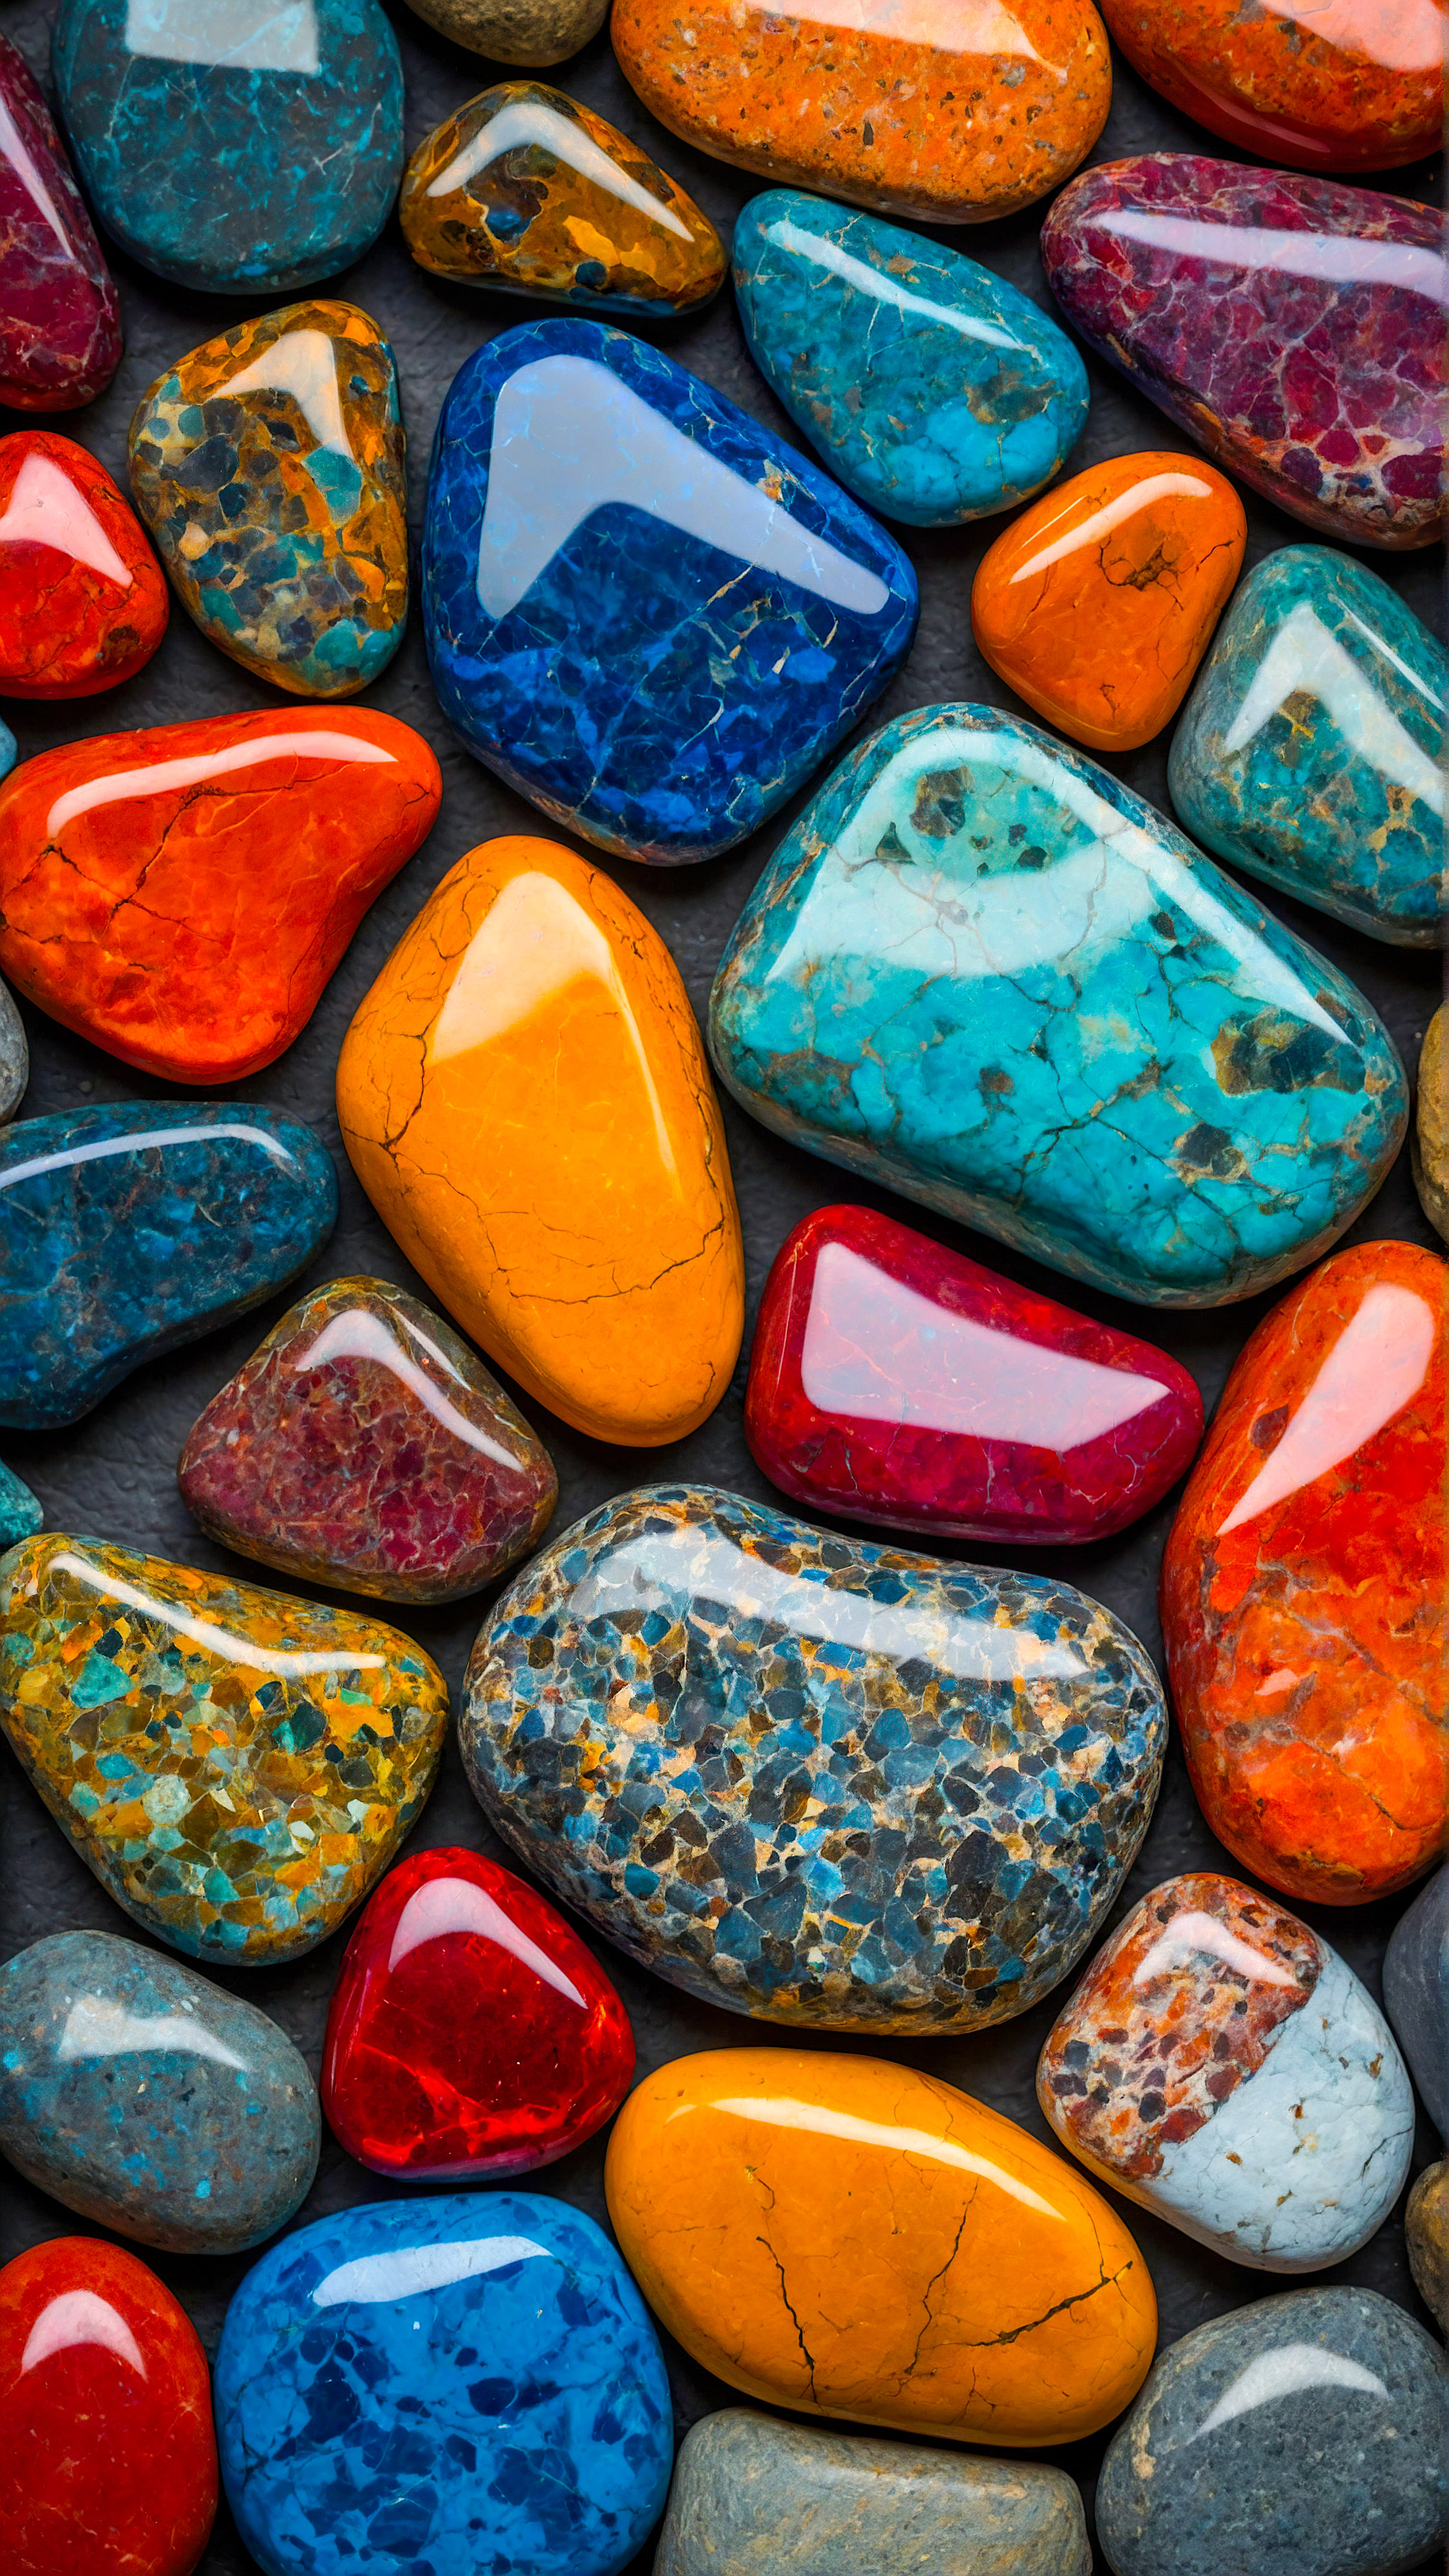 Admire the elegance of our iPhone home screen background, a colorful and artistic representation of variously shaped and sized stones with vibrant, glowing colors and patterns, adding a touch of artistic flair to your device.